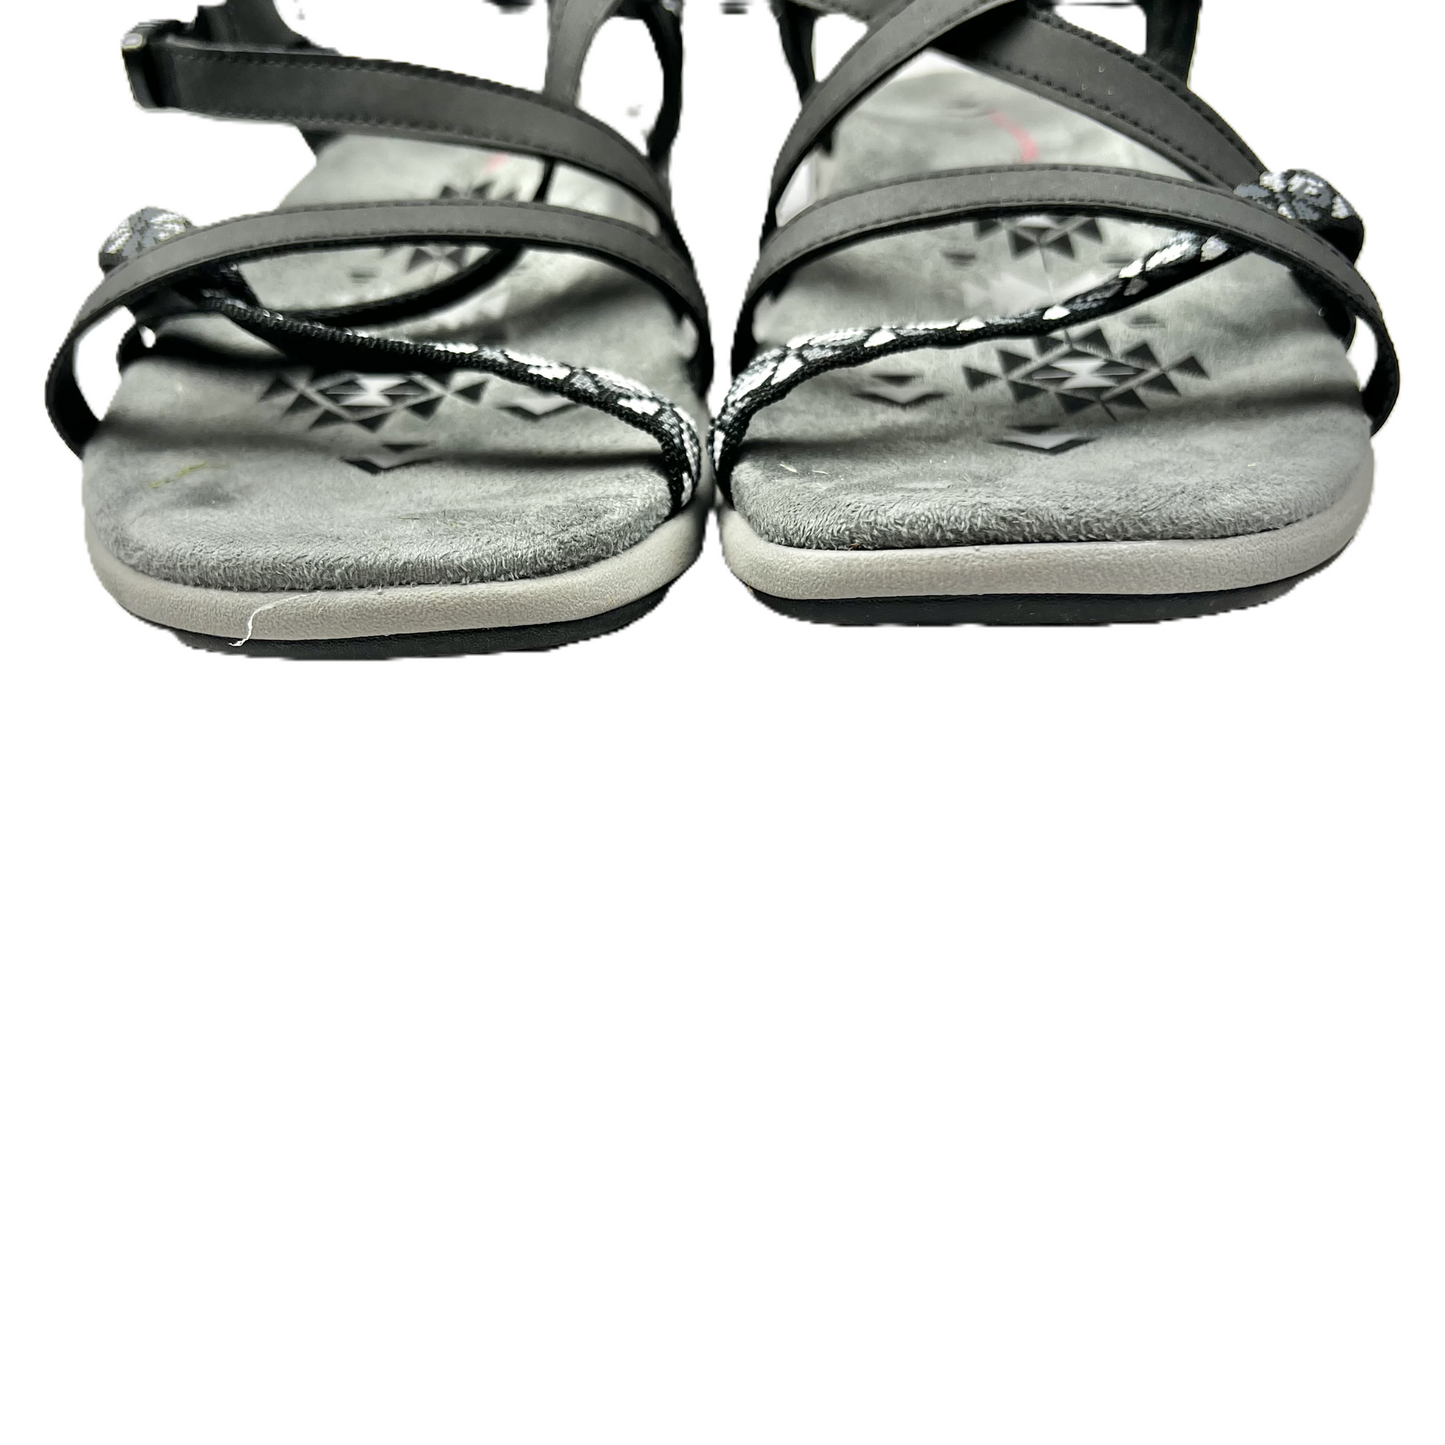 Black & Grey Sandals Flats By Skechers, Size: 8